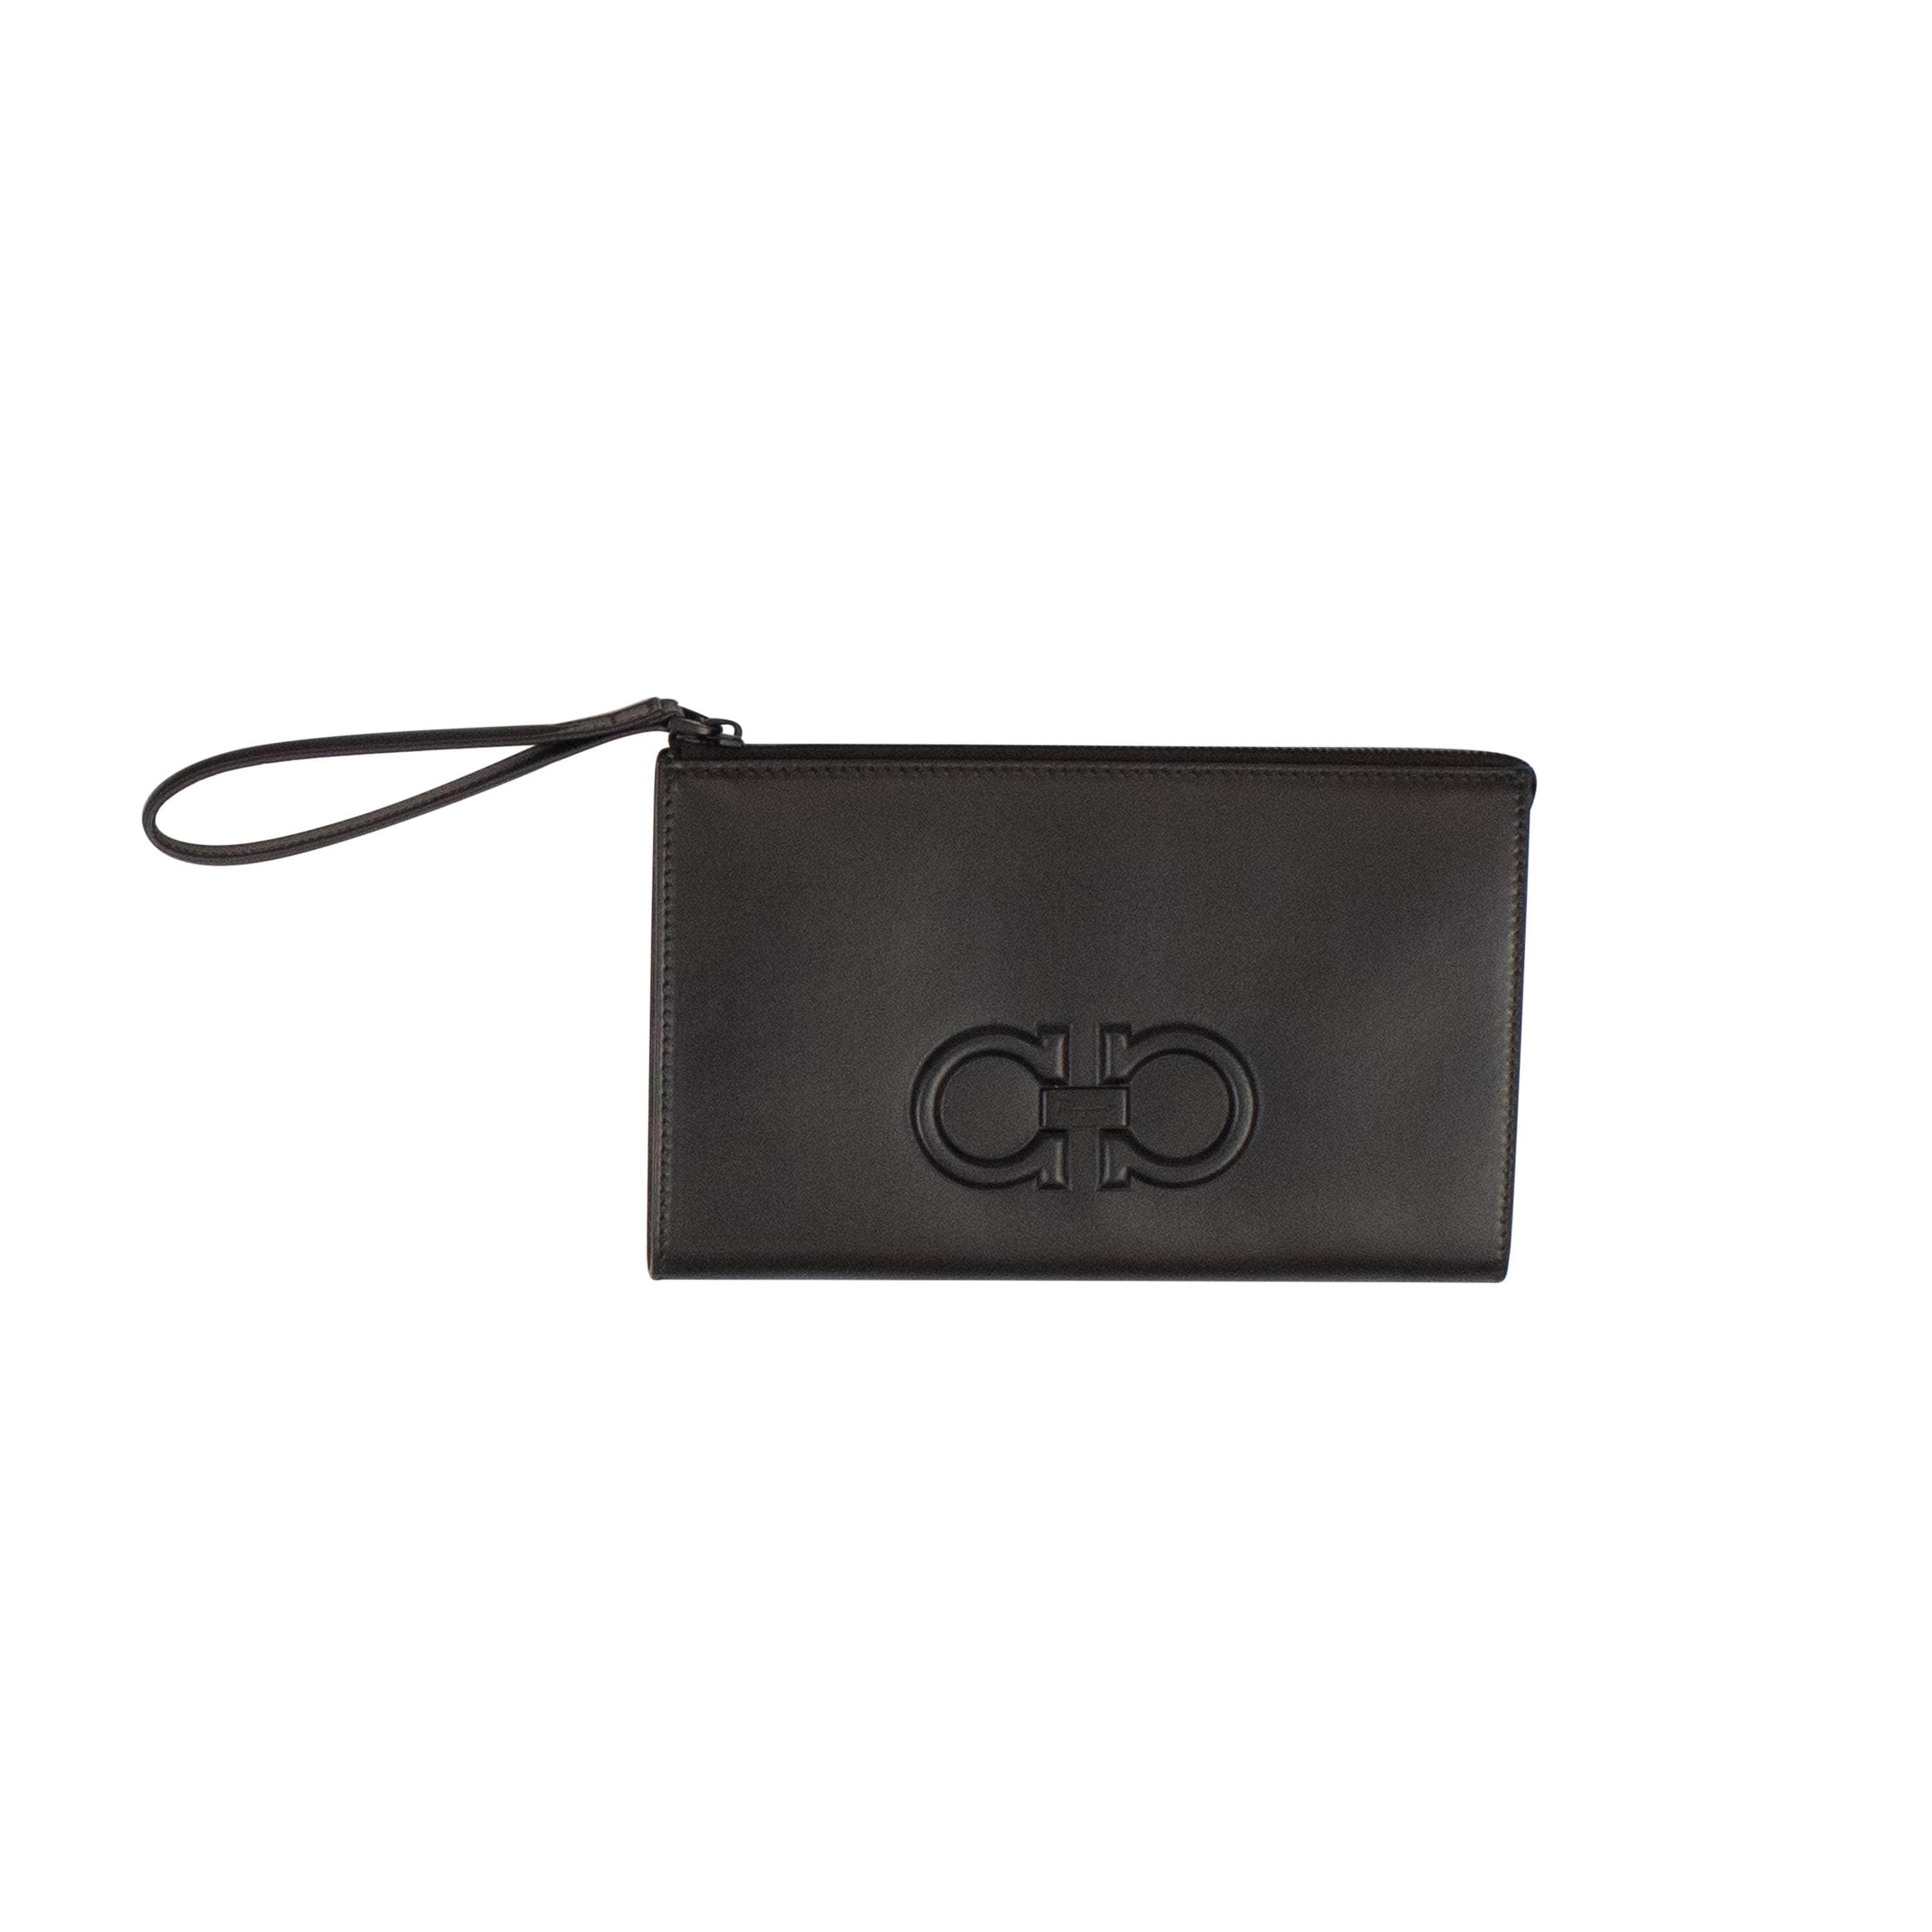 Salvatore Ferragamo channelenable-all, chicmi, couponcollection, gender-mens, main-accessories, mens-pouches, mens-shoes, shop375, under-250 OS EMBOSSED GANCINI EMBLEM POUCH FRG-XACC-0007/OS FRG-XACC-0007/OS